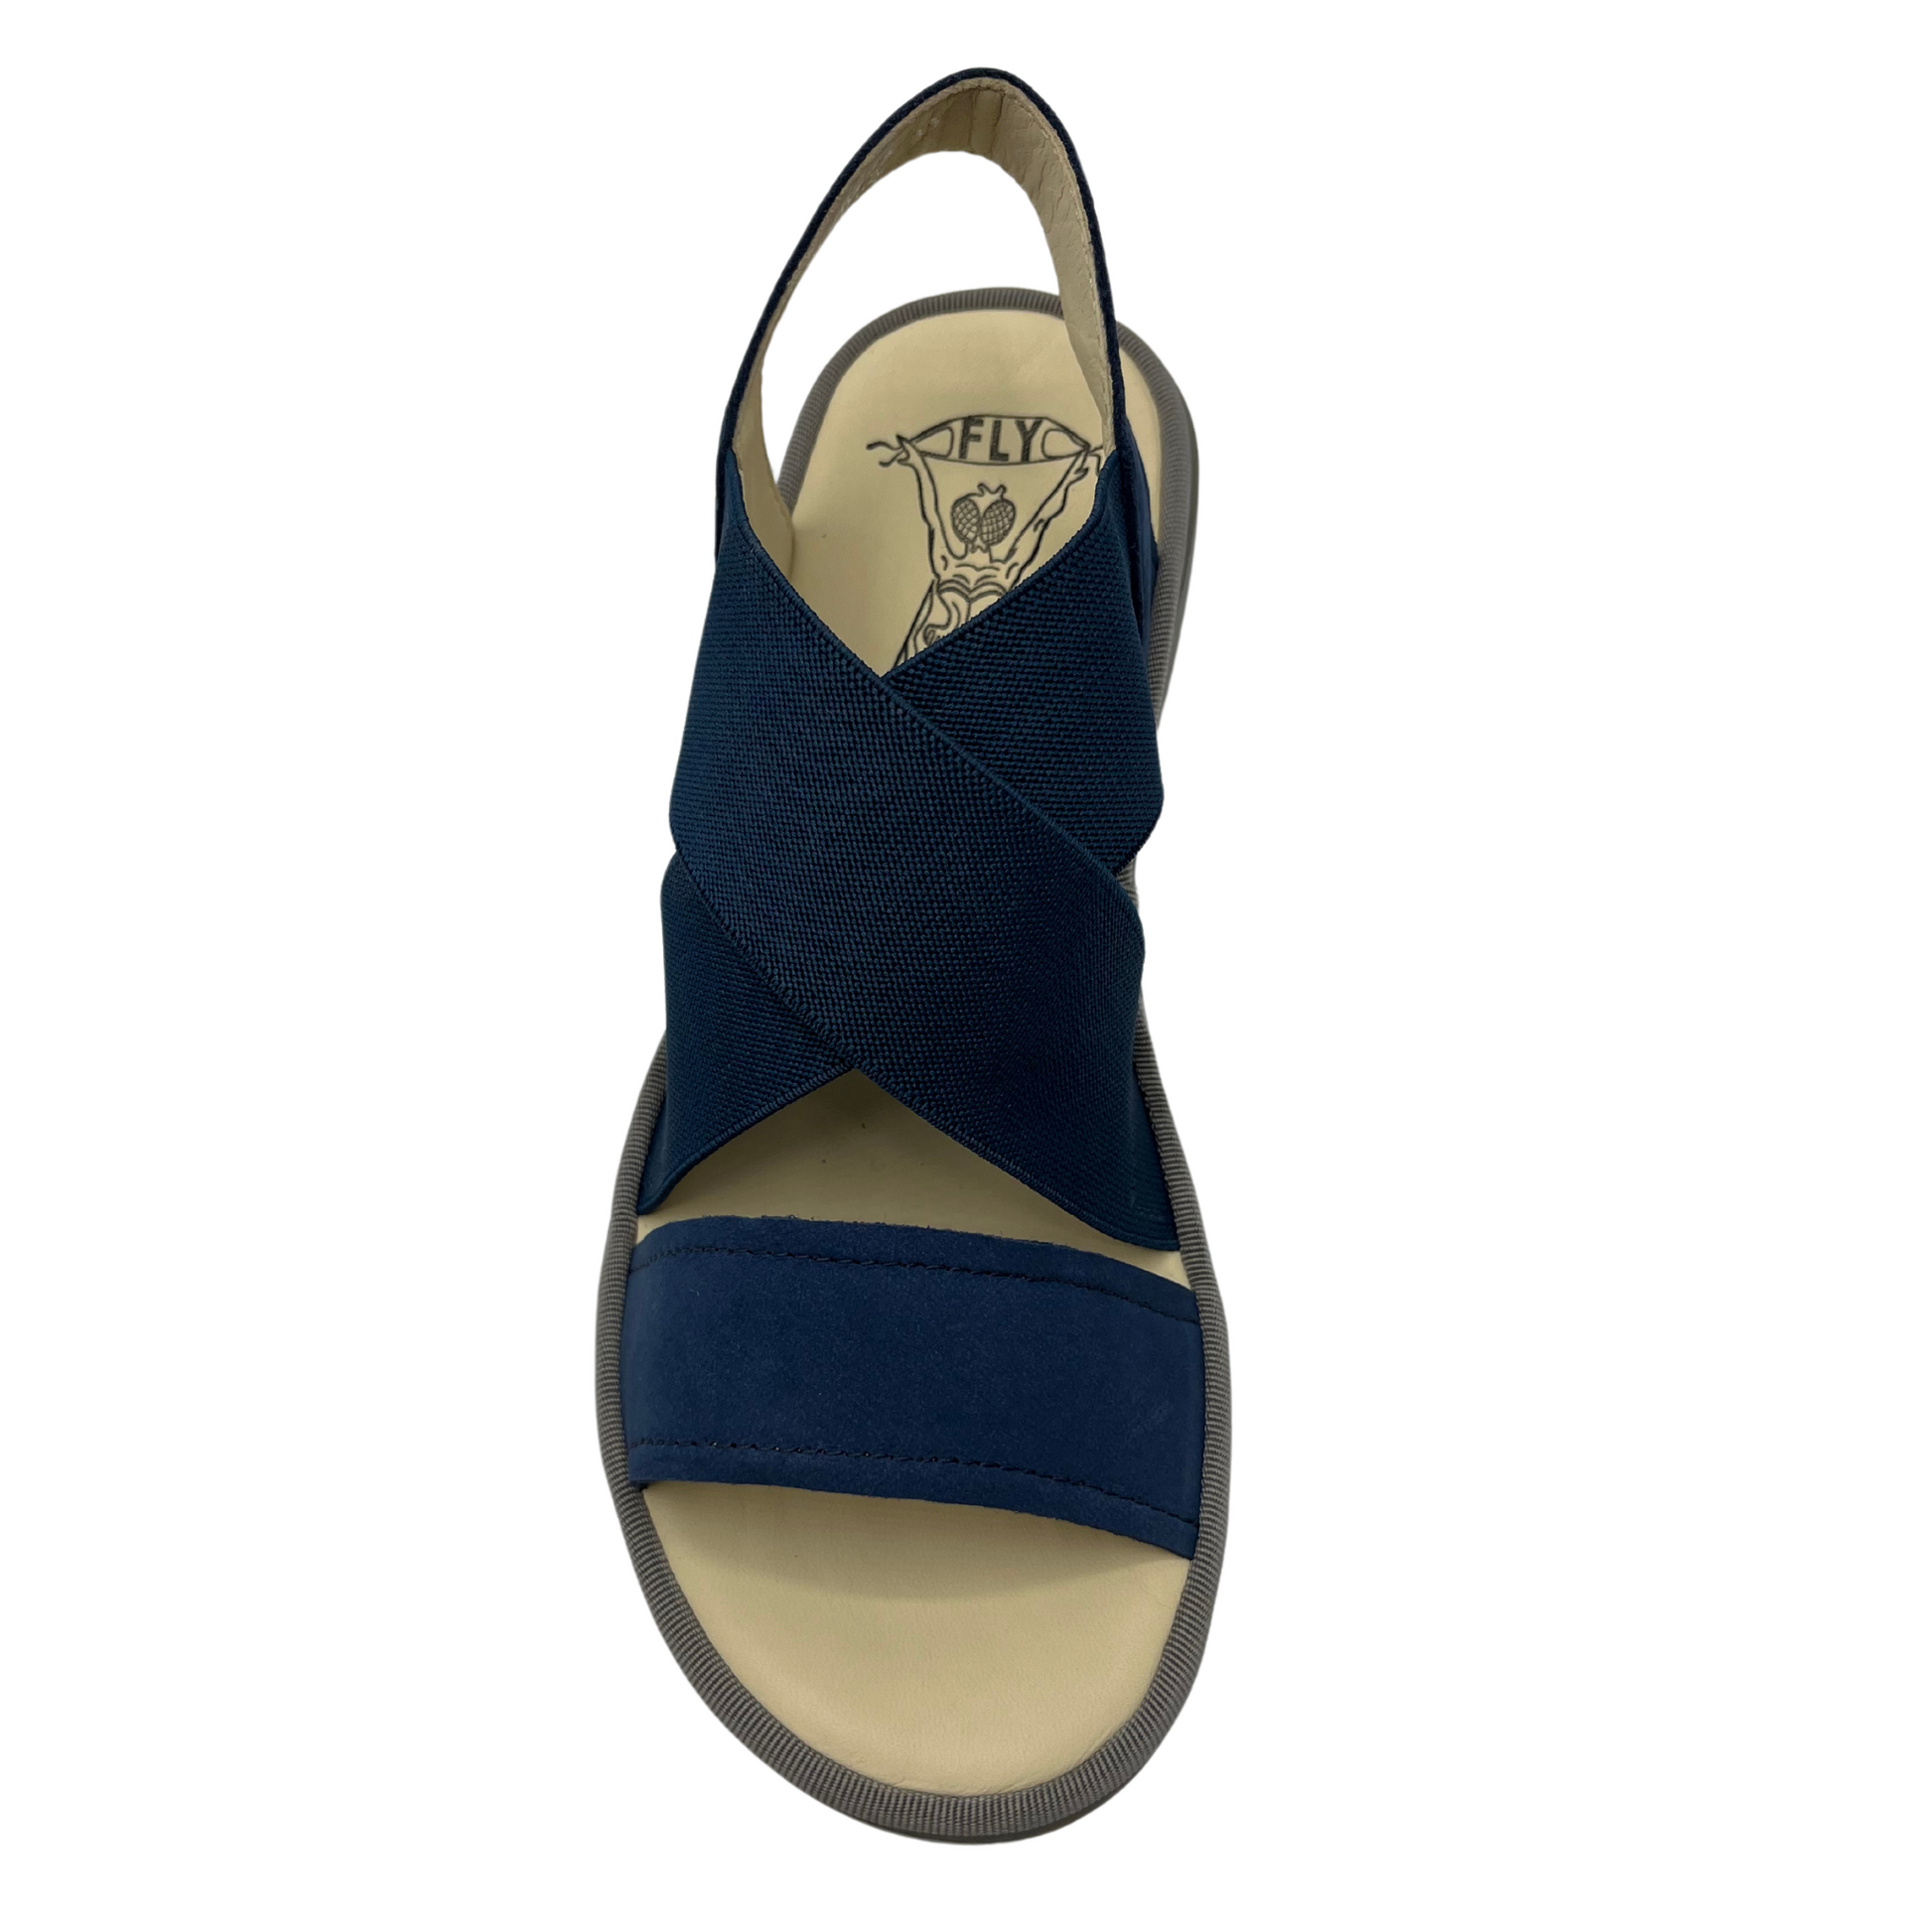 Top view of navy blue stretchy strapped sandal with lugged rubber outsole and rounded toe